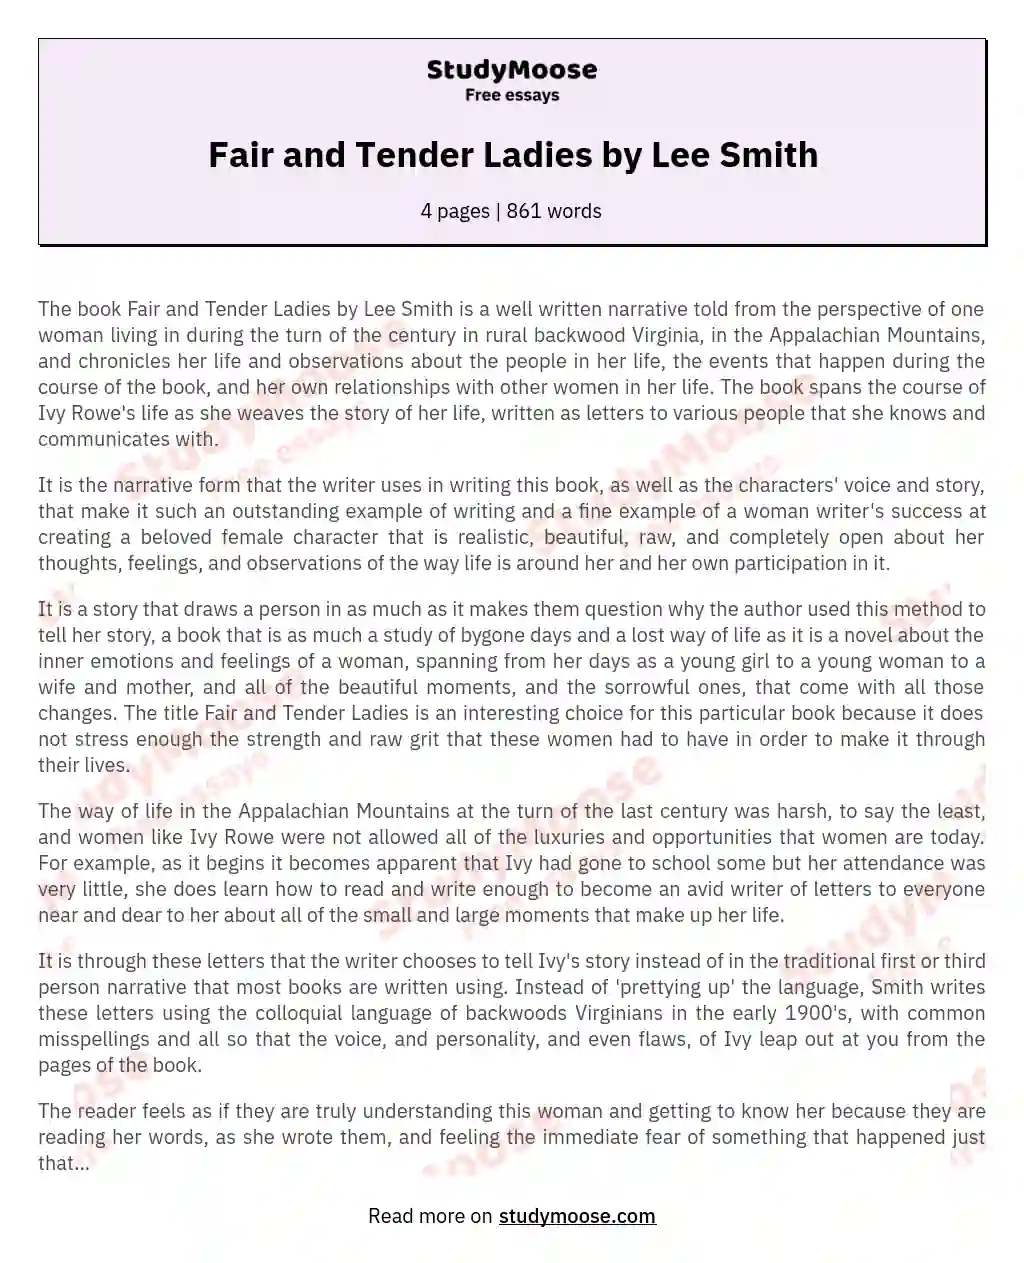 Fair and Tender Ladies by Lee Smith essay